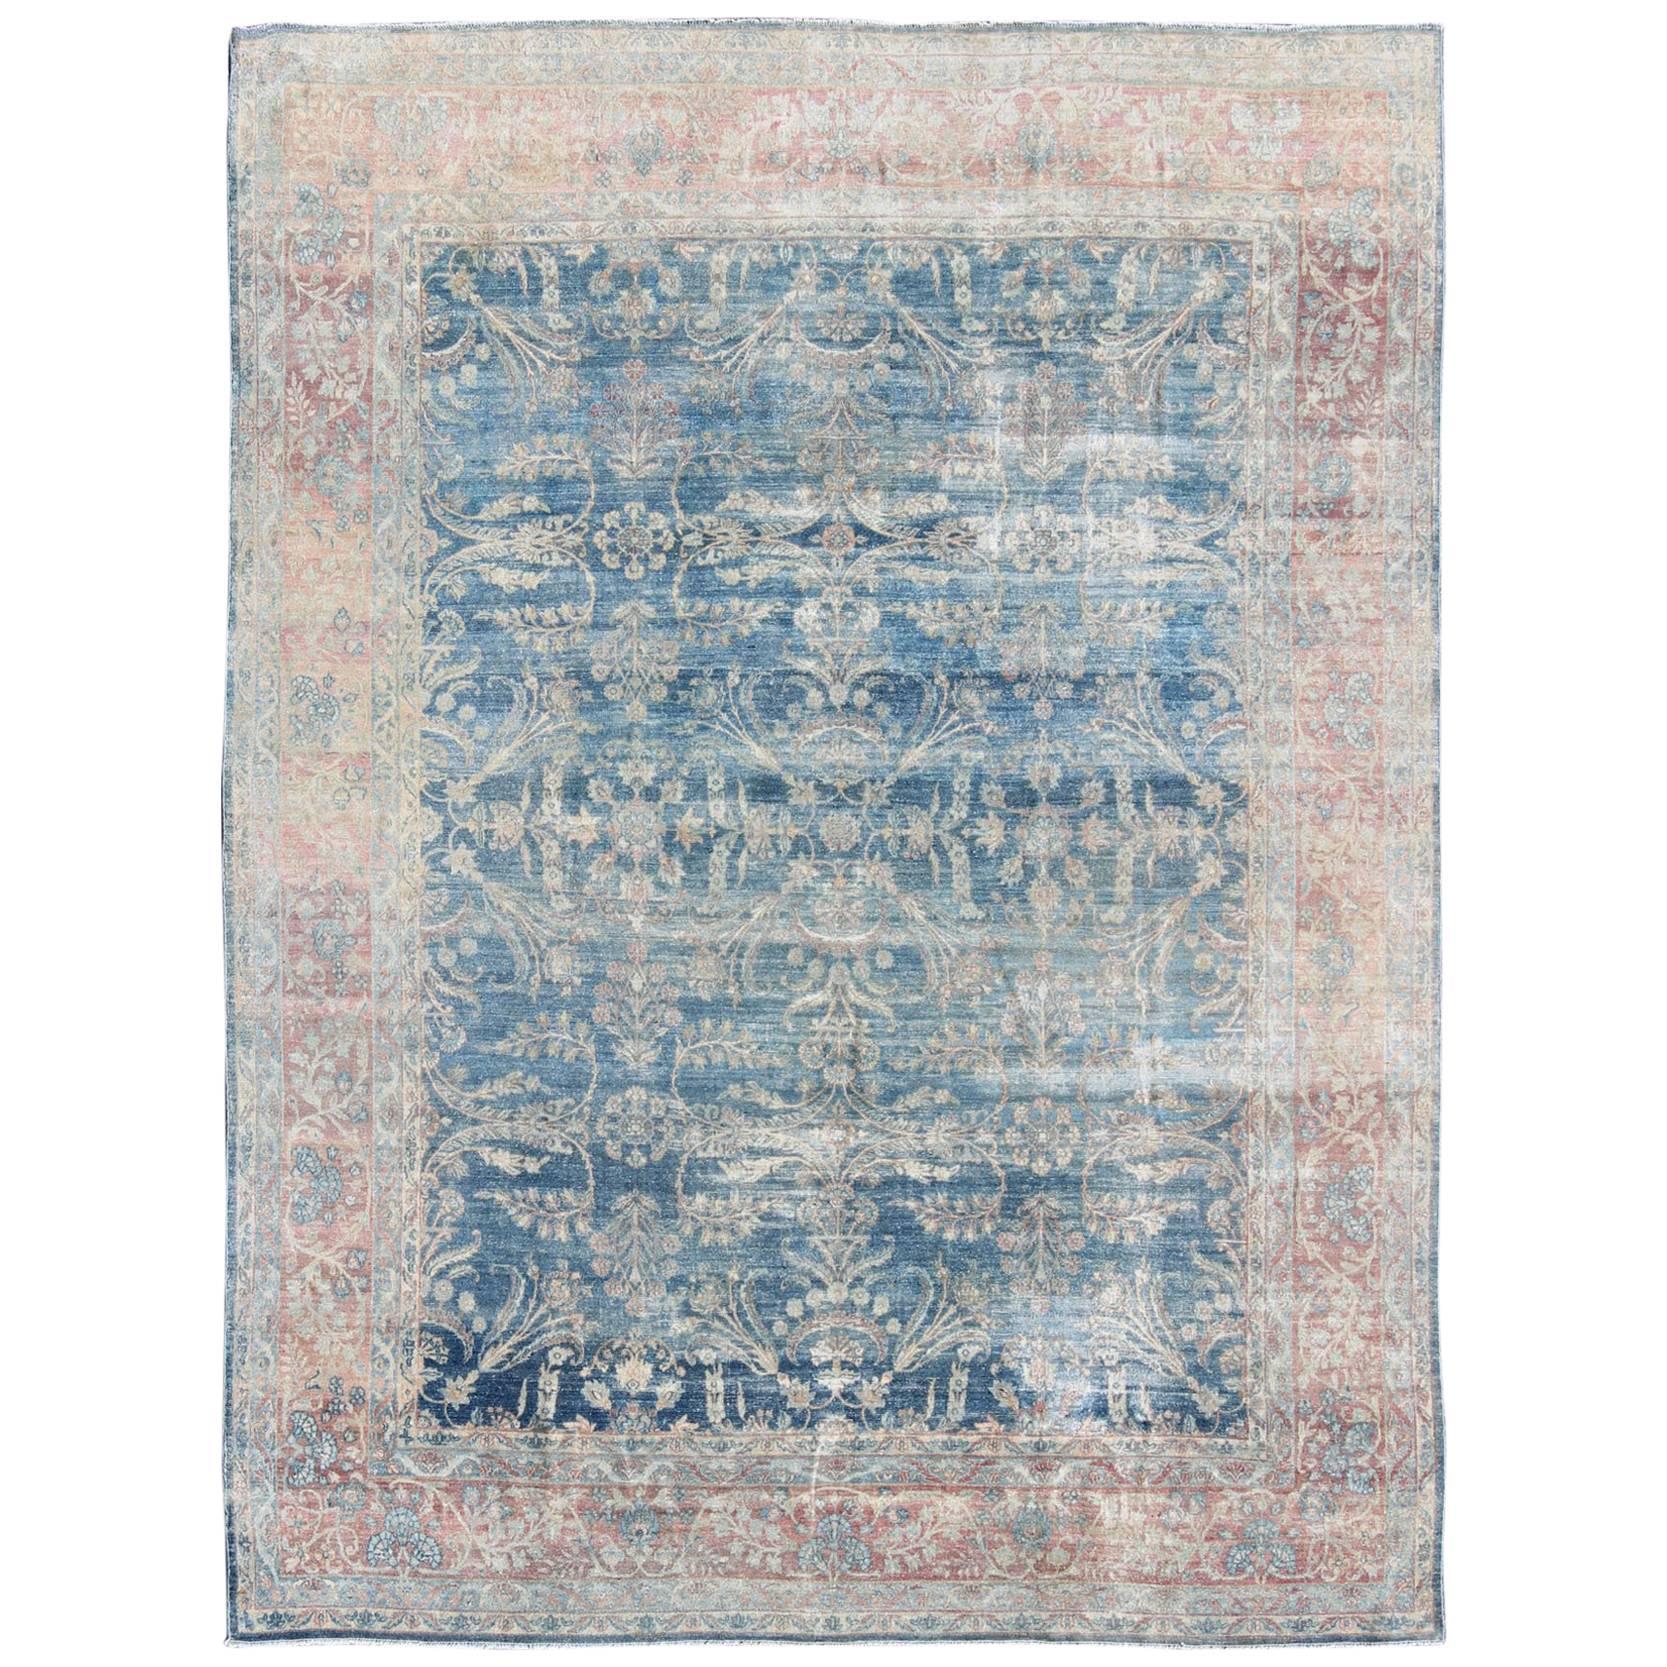 Antique Persian Kerman Rug with Paisley and Floral Motifs in Blue Field and Pink For Sale